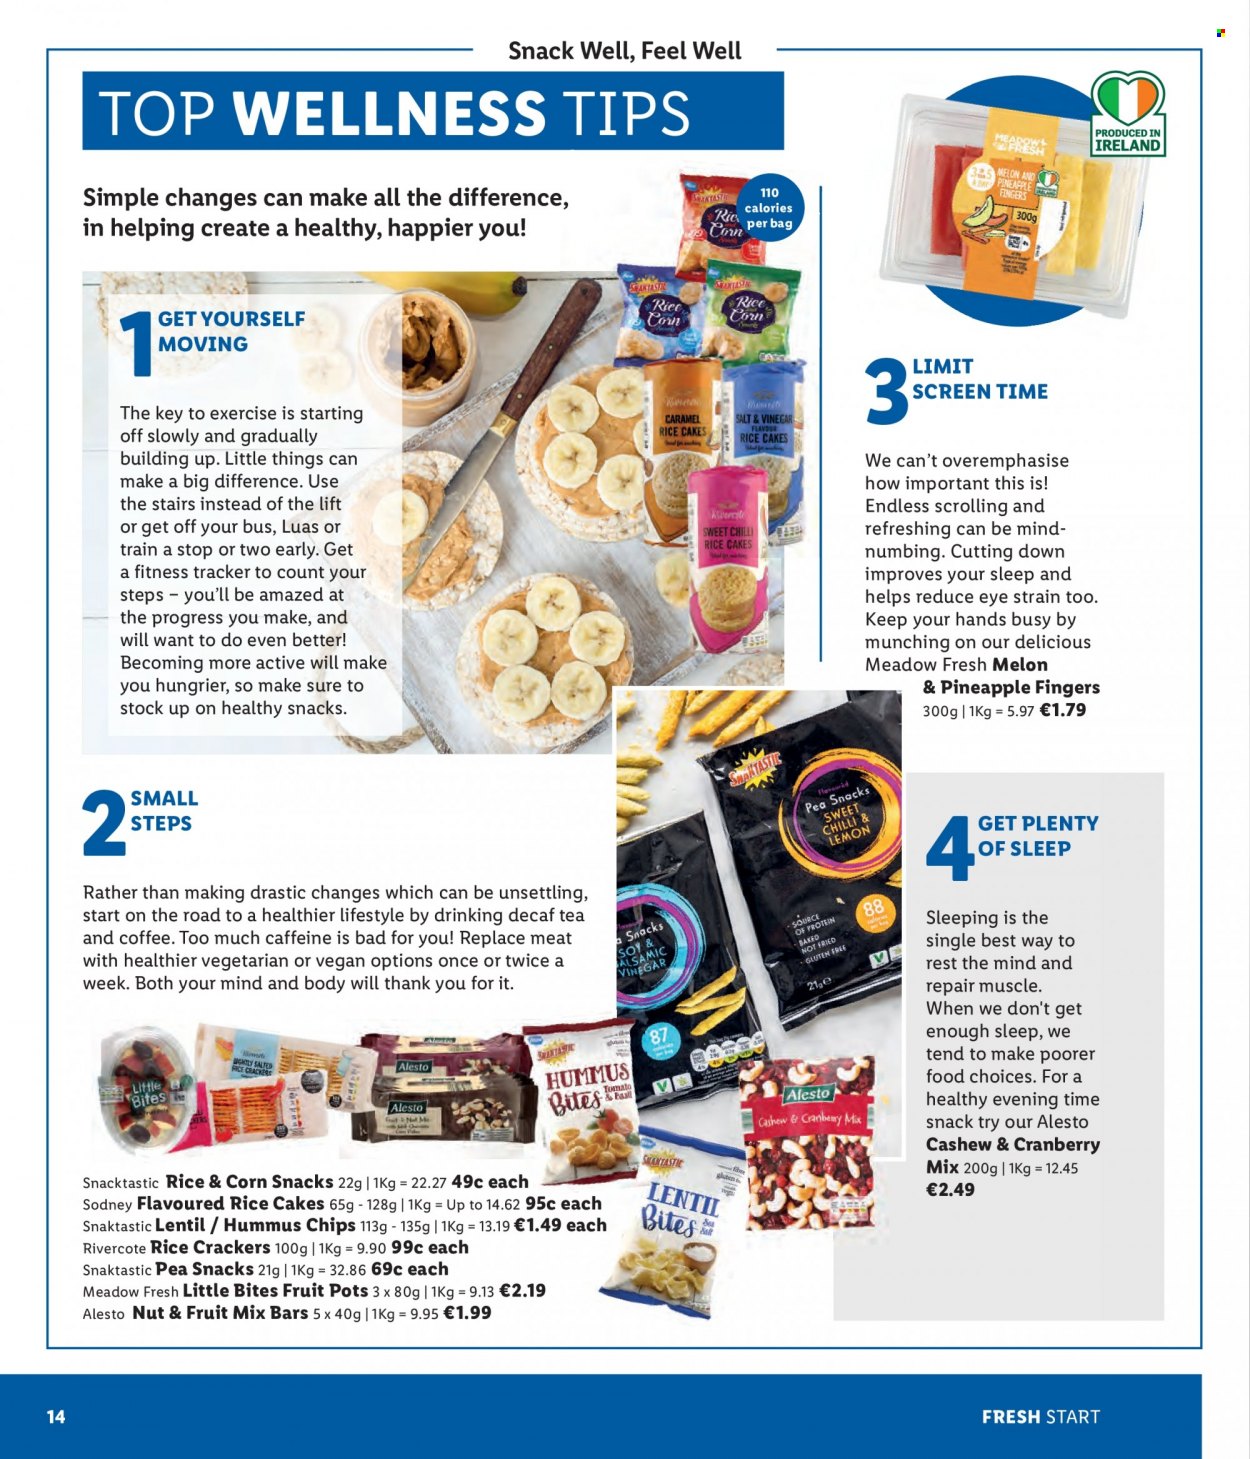 thumbnail - Lidl offer  - Sales products - pineapple, hummus, snack, fruit mix, crackers, Little Bites, chips, rice crackers, coffee, Plenty, bag, pot, fitness tracker, train. Page 14.